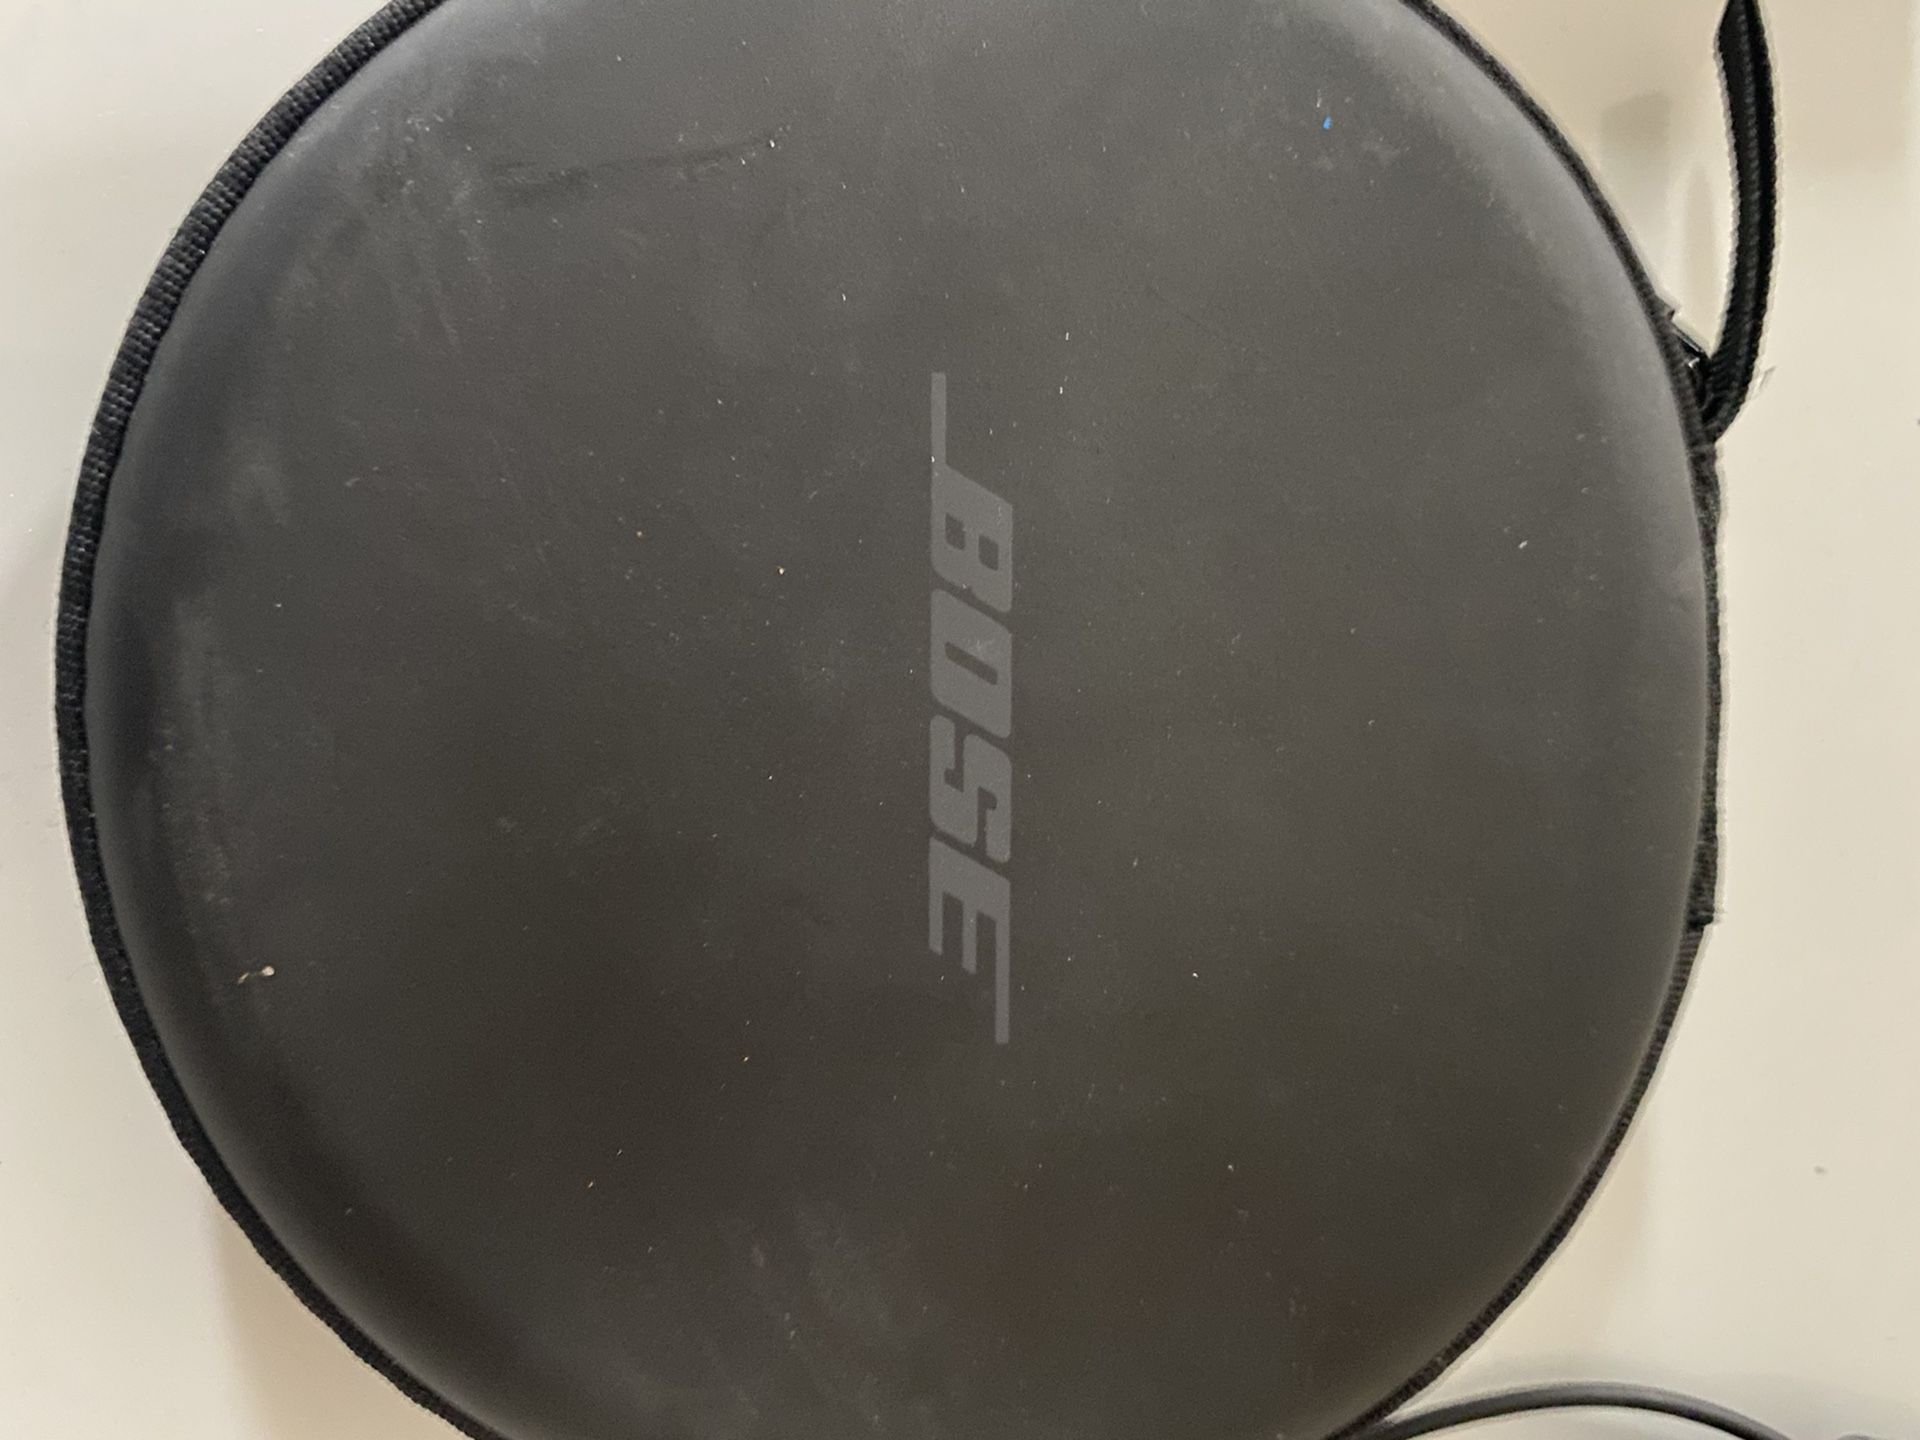 $$150.00 BOSE Quiet Control Bluetooth 3.0 With BOSE Connect